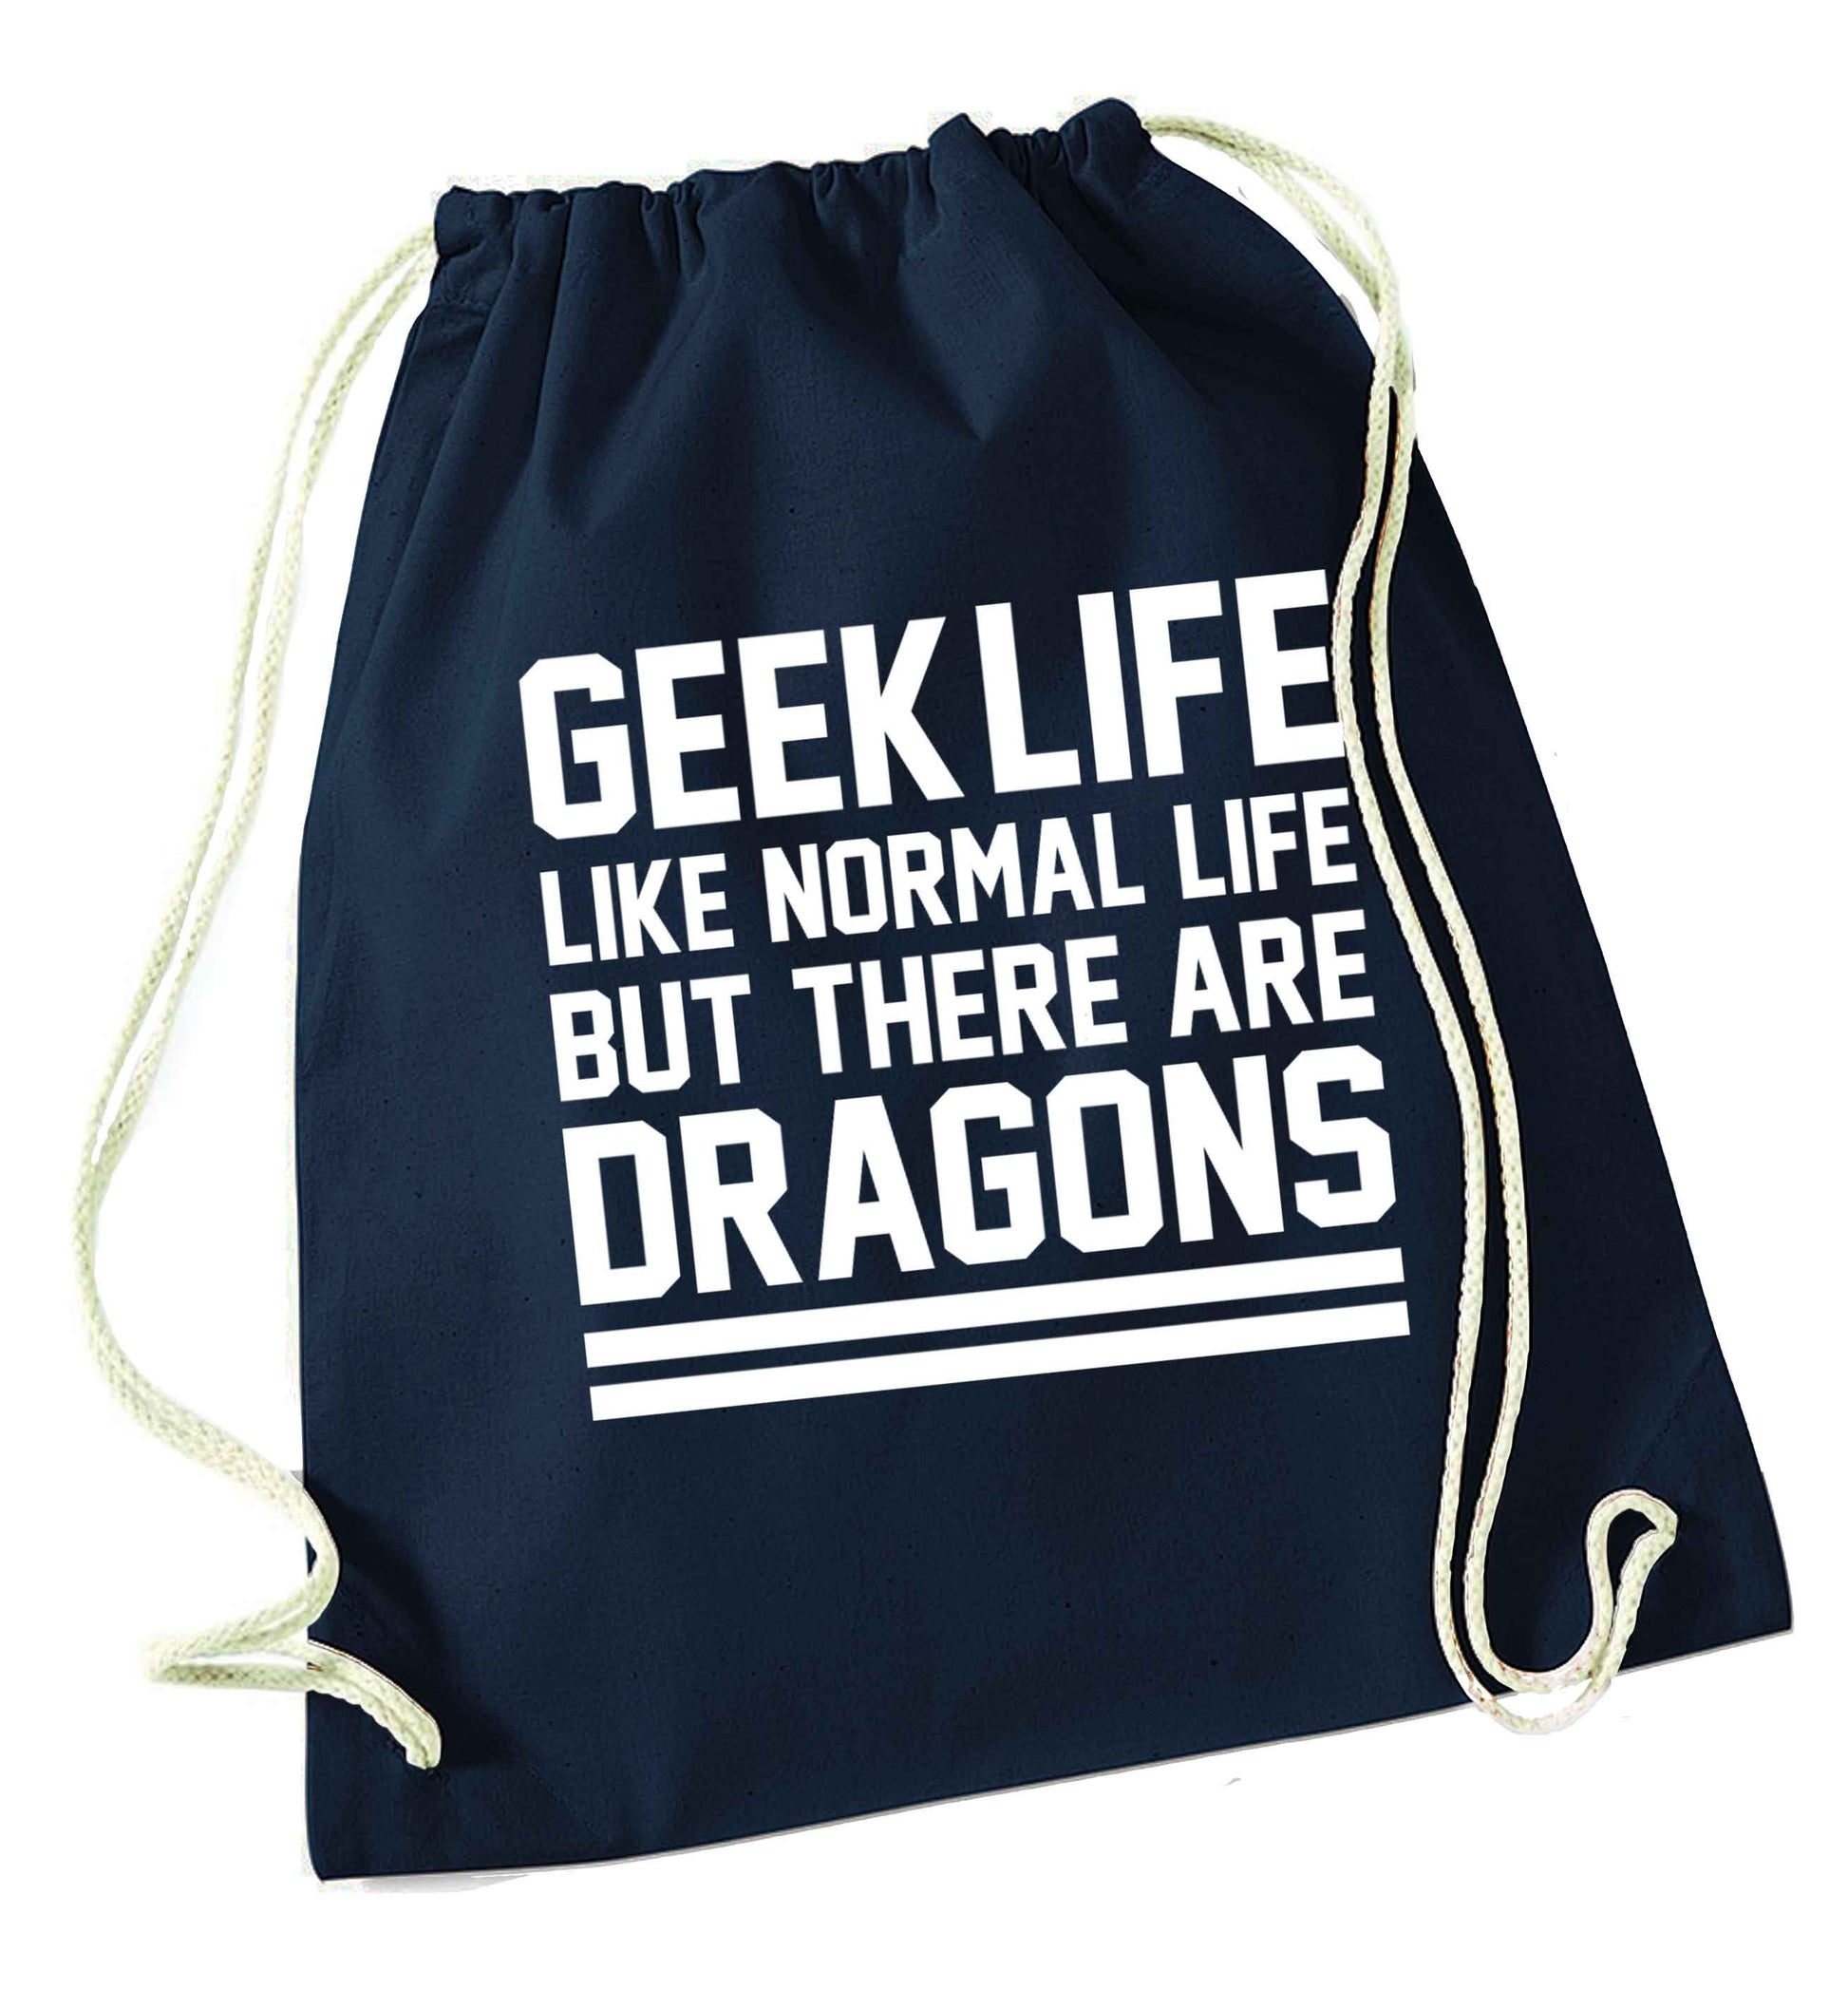 Geek life like normal life but there are dragons navy drawstring bag